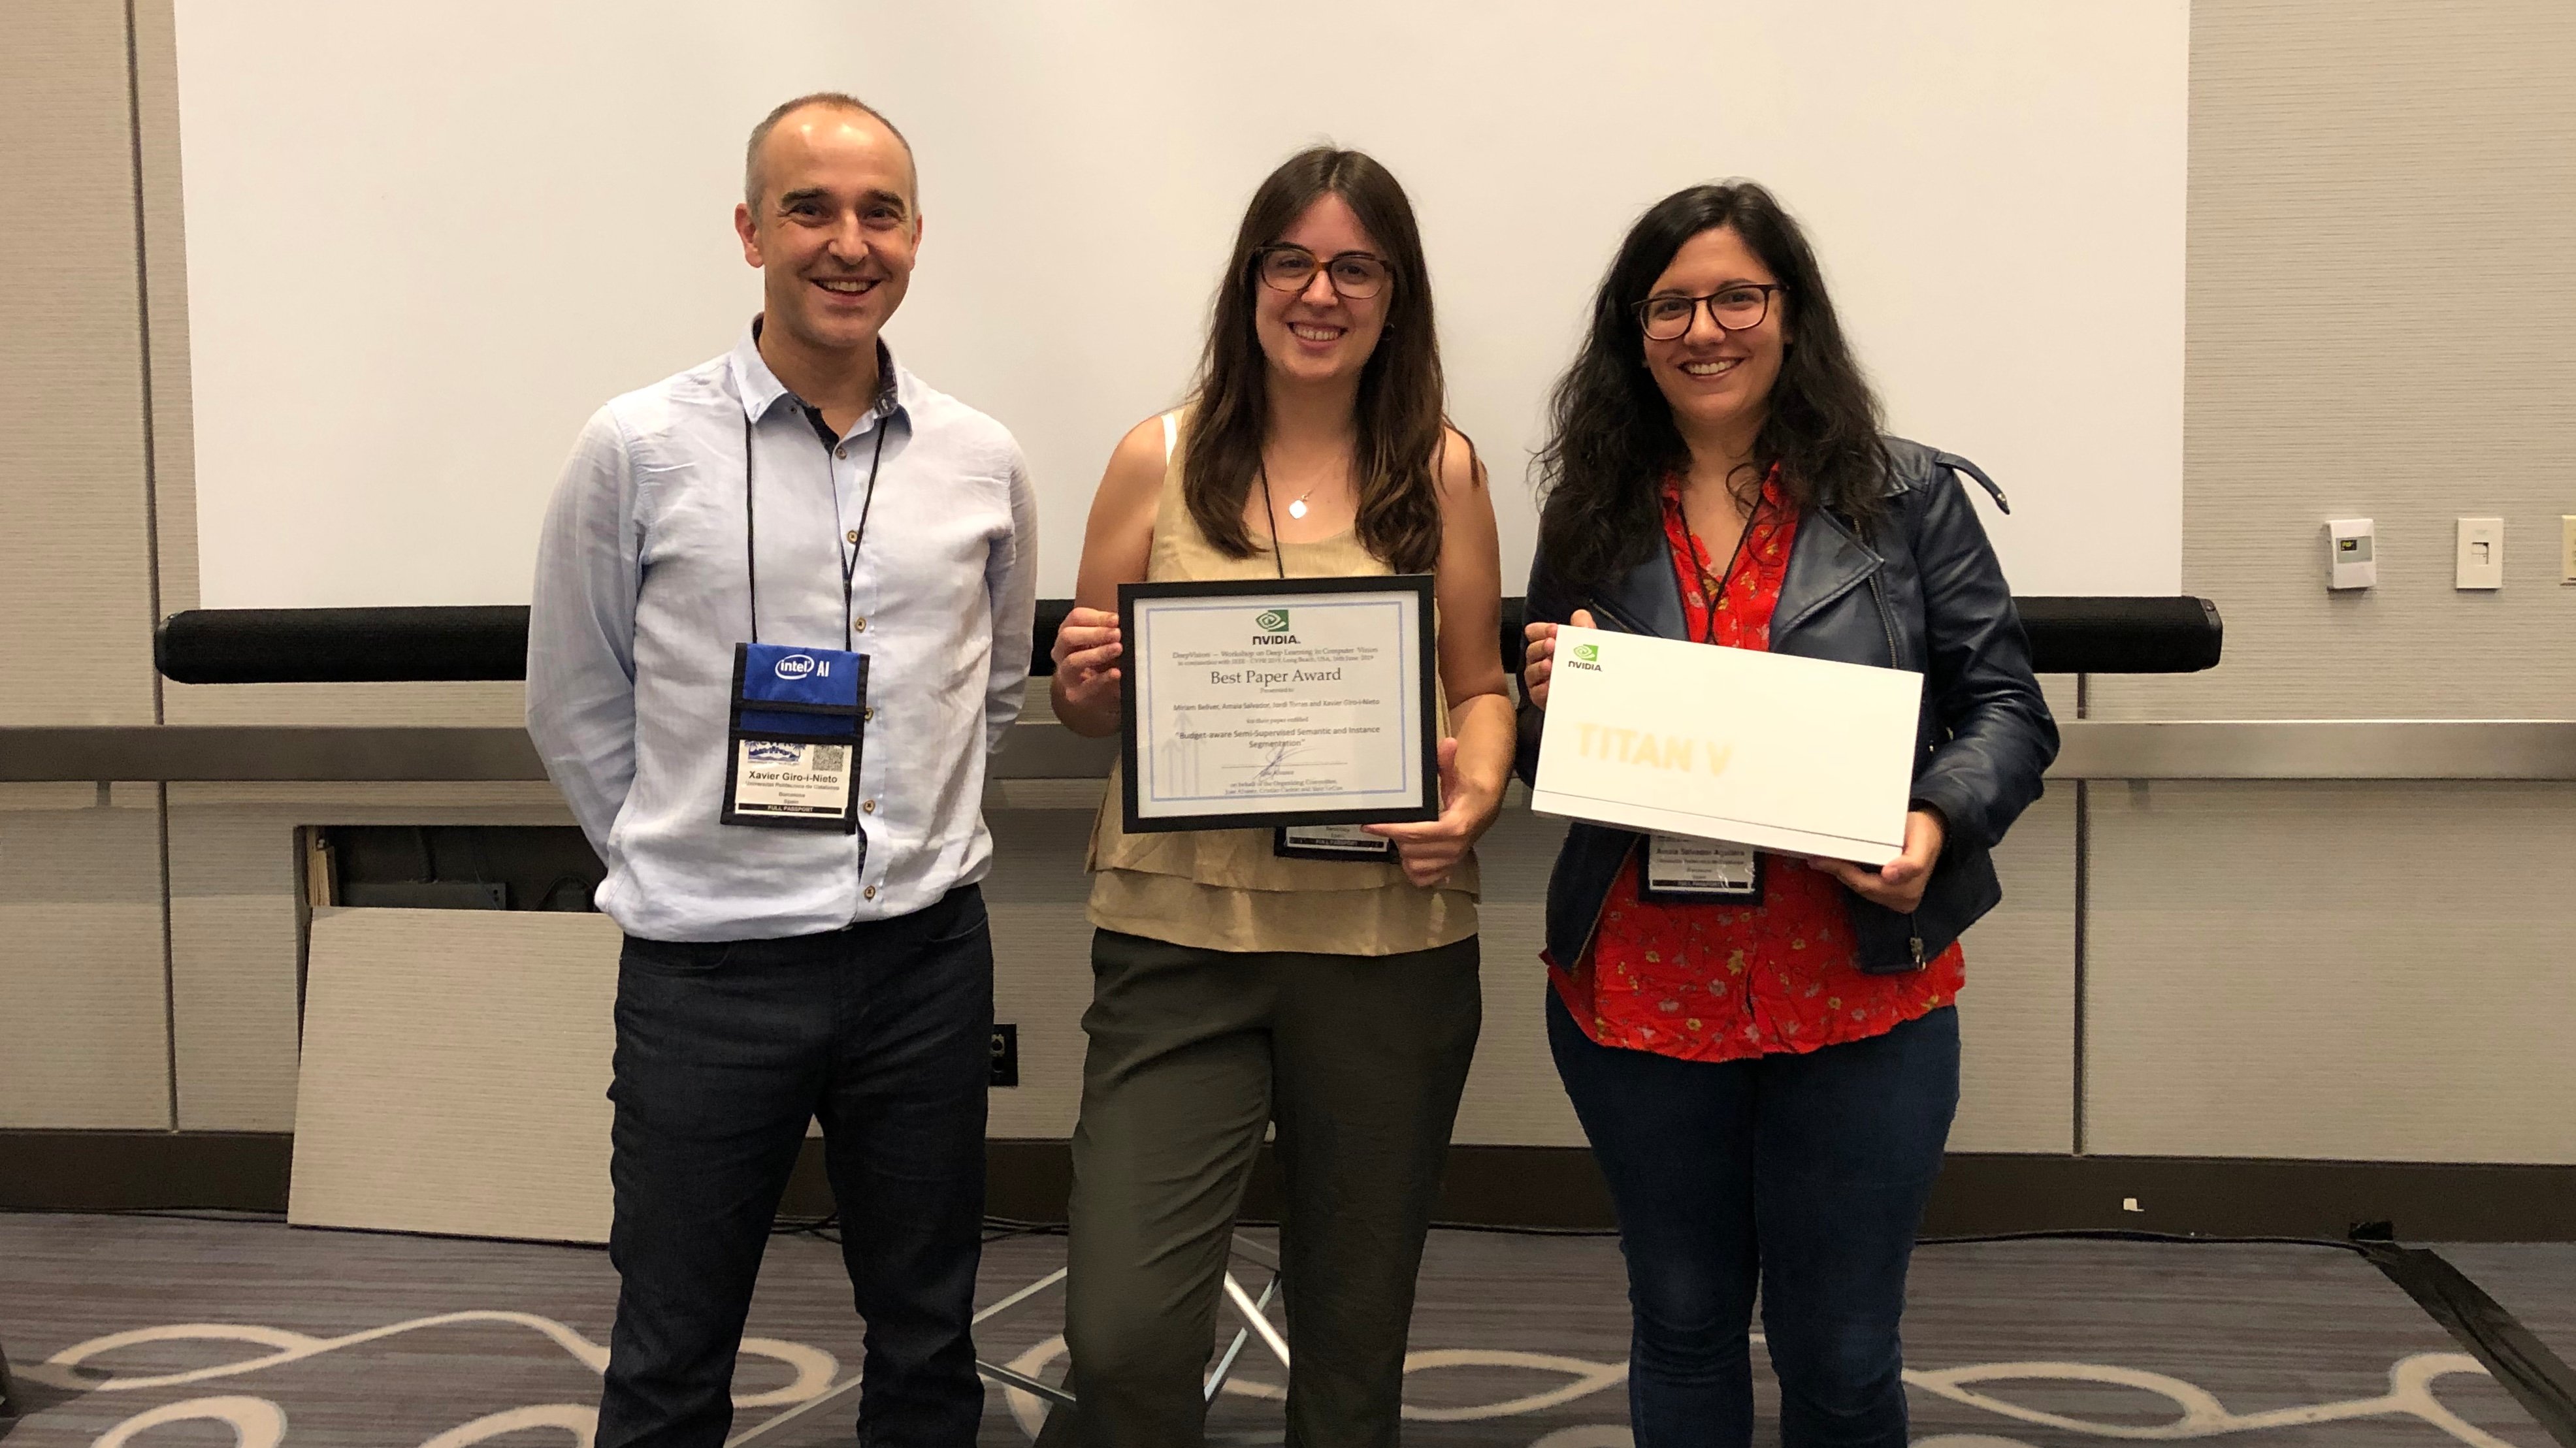 Winners of the best paper award at the #CVPR2019 DeepVision workshop